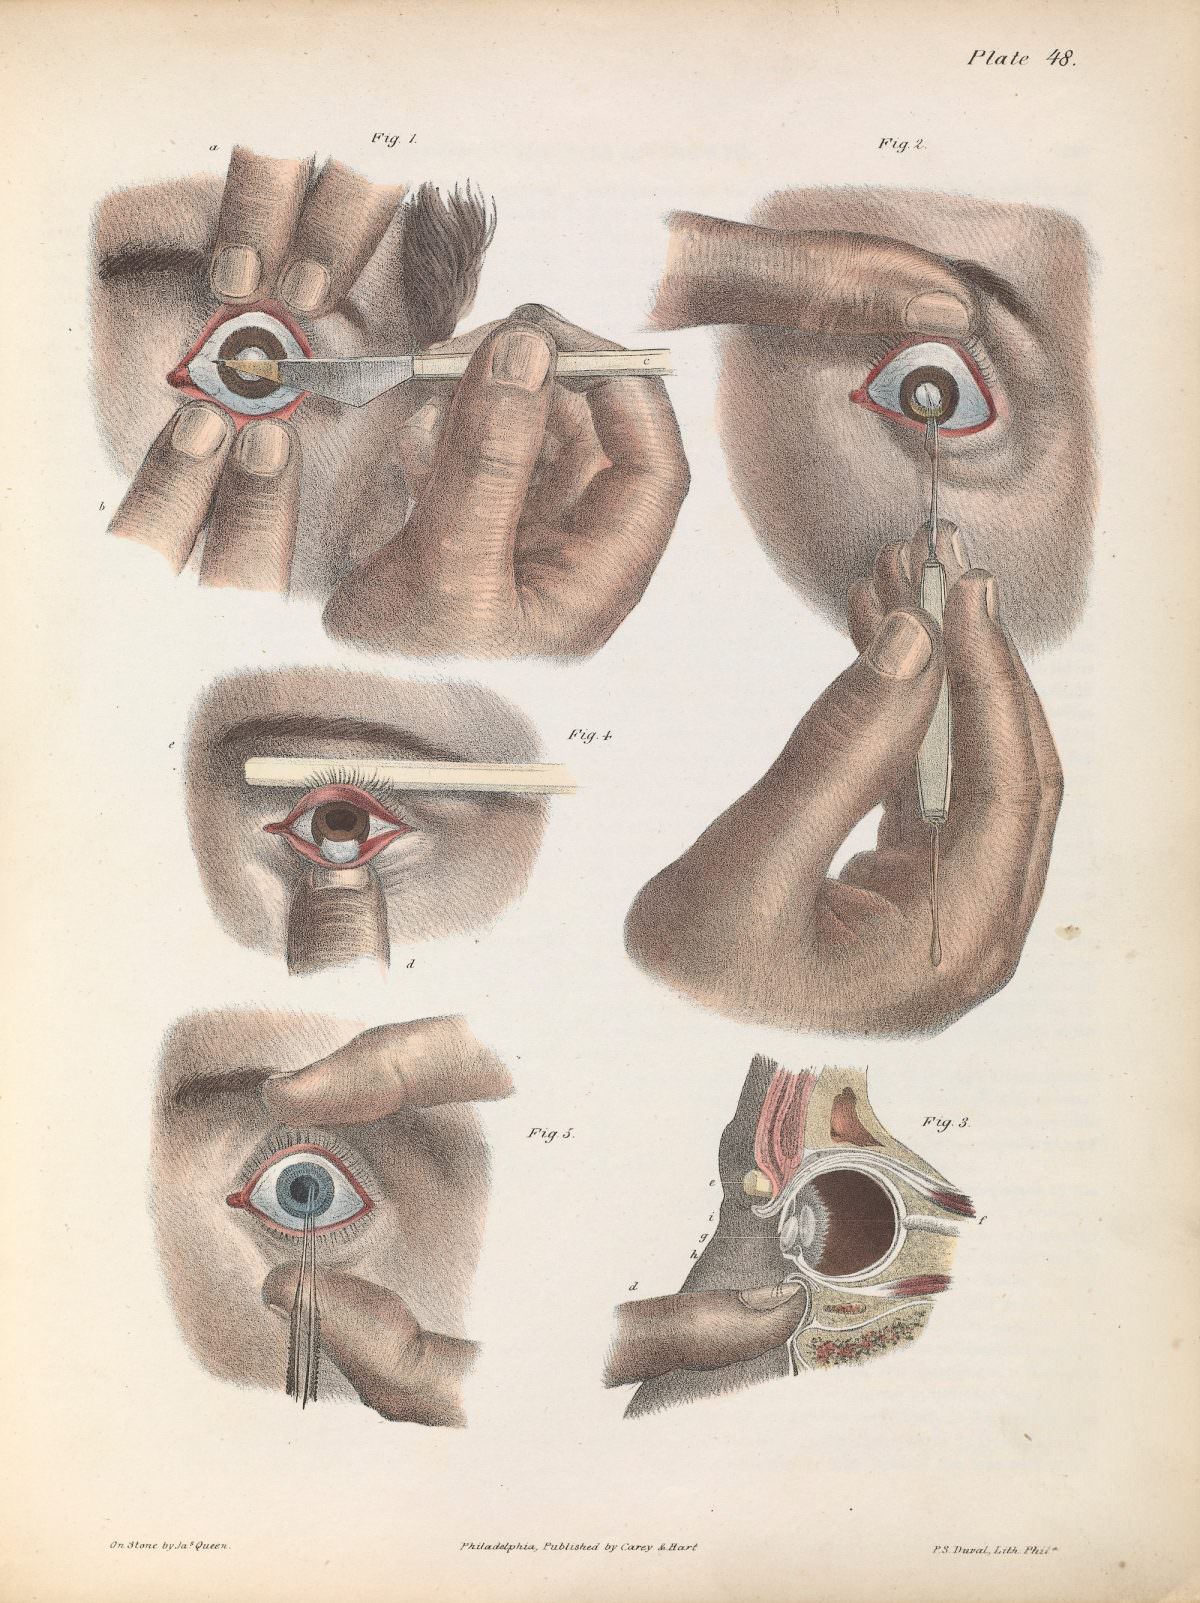 Plate XLVIII. Illustration of surgery on the eye for the removal of a cataract. Operation by extraction – inferior section of the cornea.